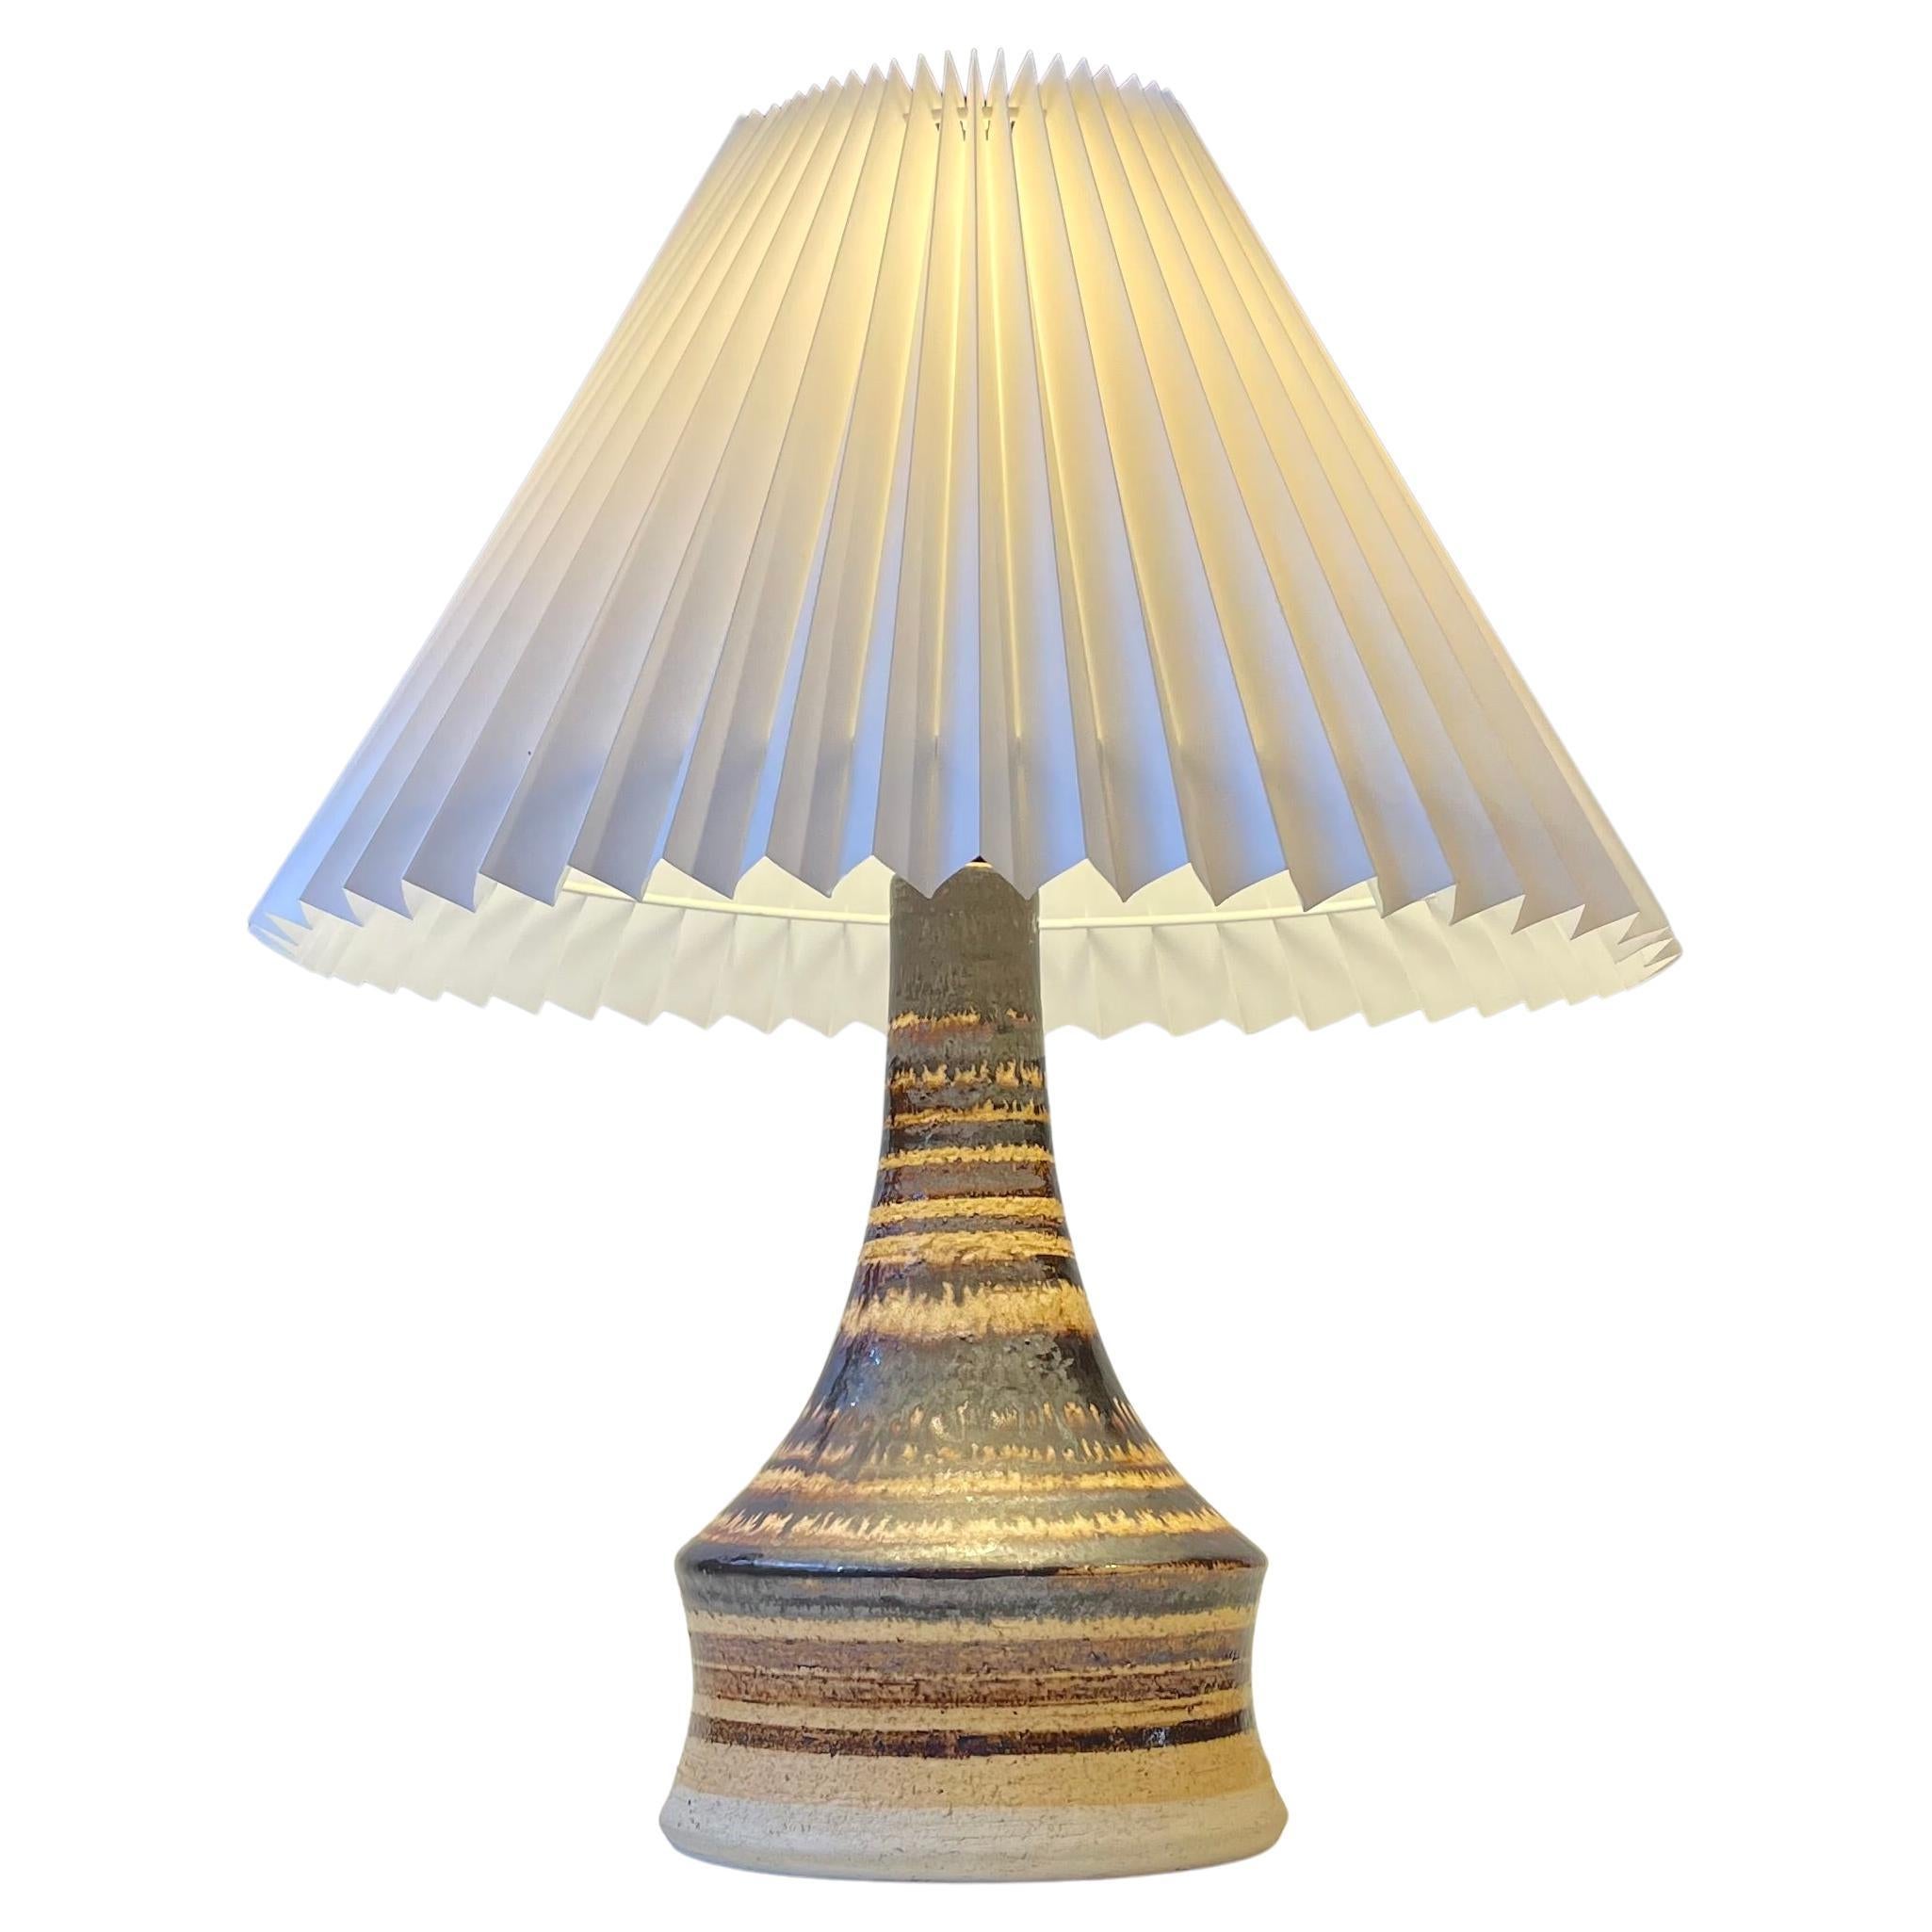 Italian Modern Table Lamp in Ceramic with Earthy Glaze Stripes, 1970s For Sale